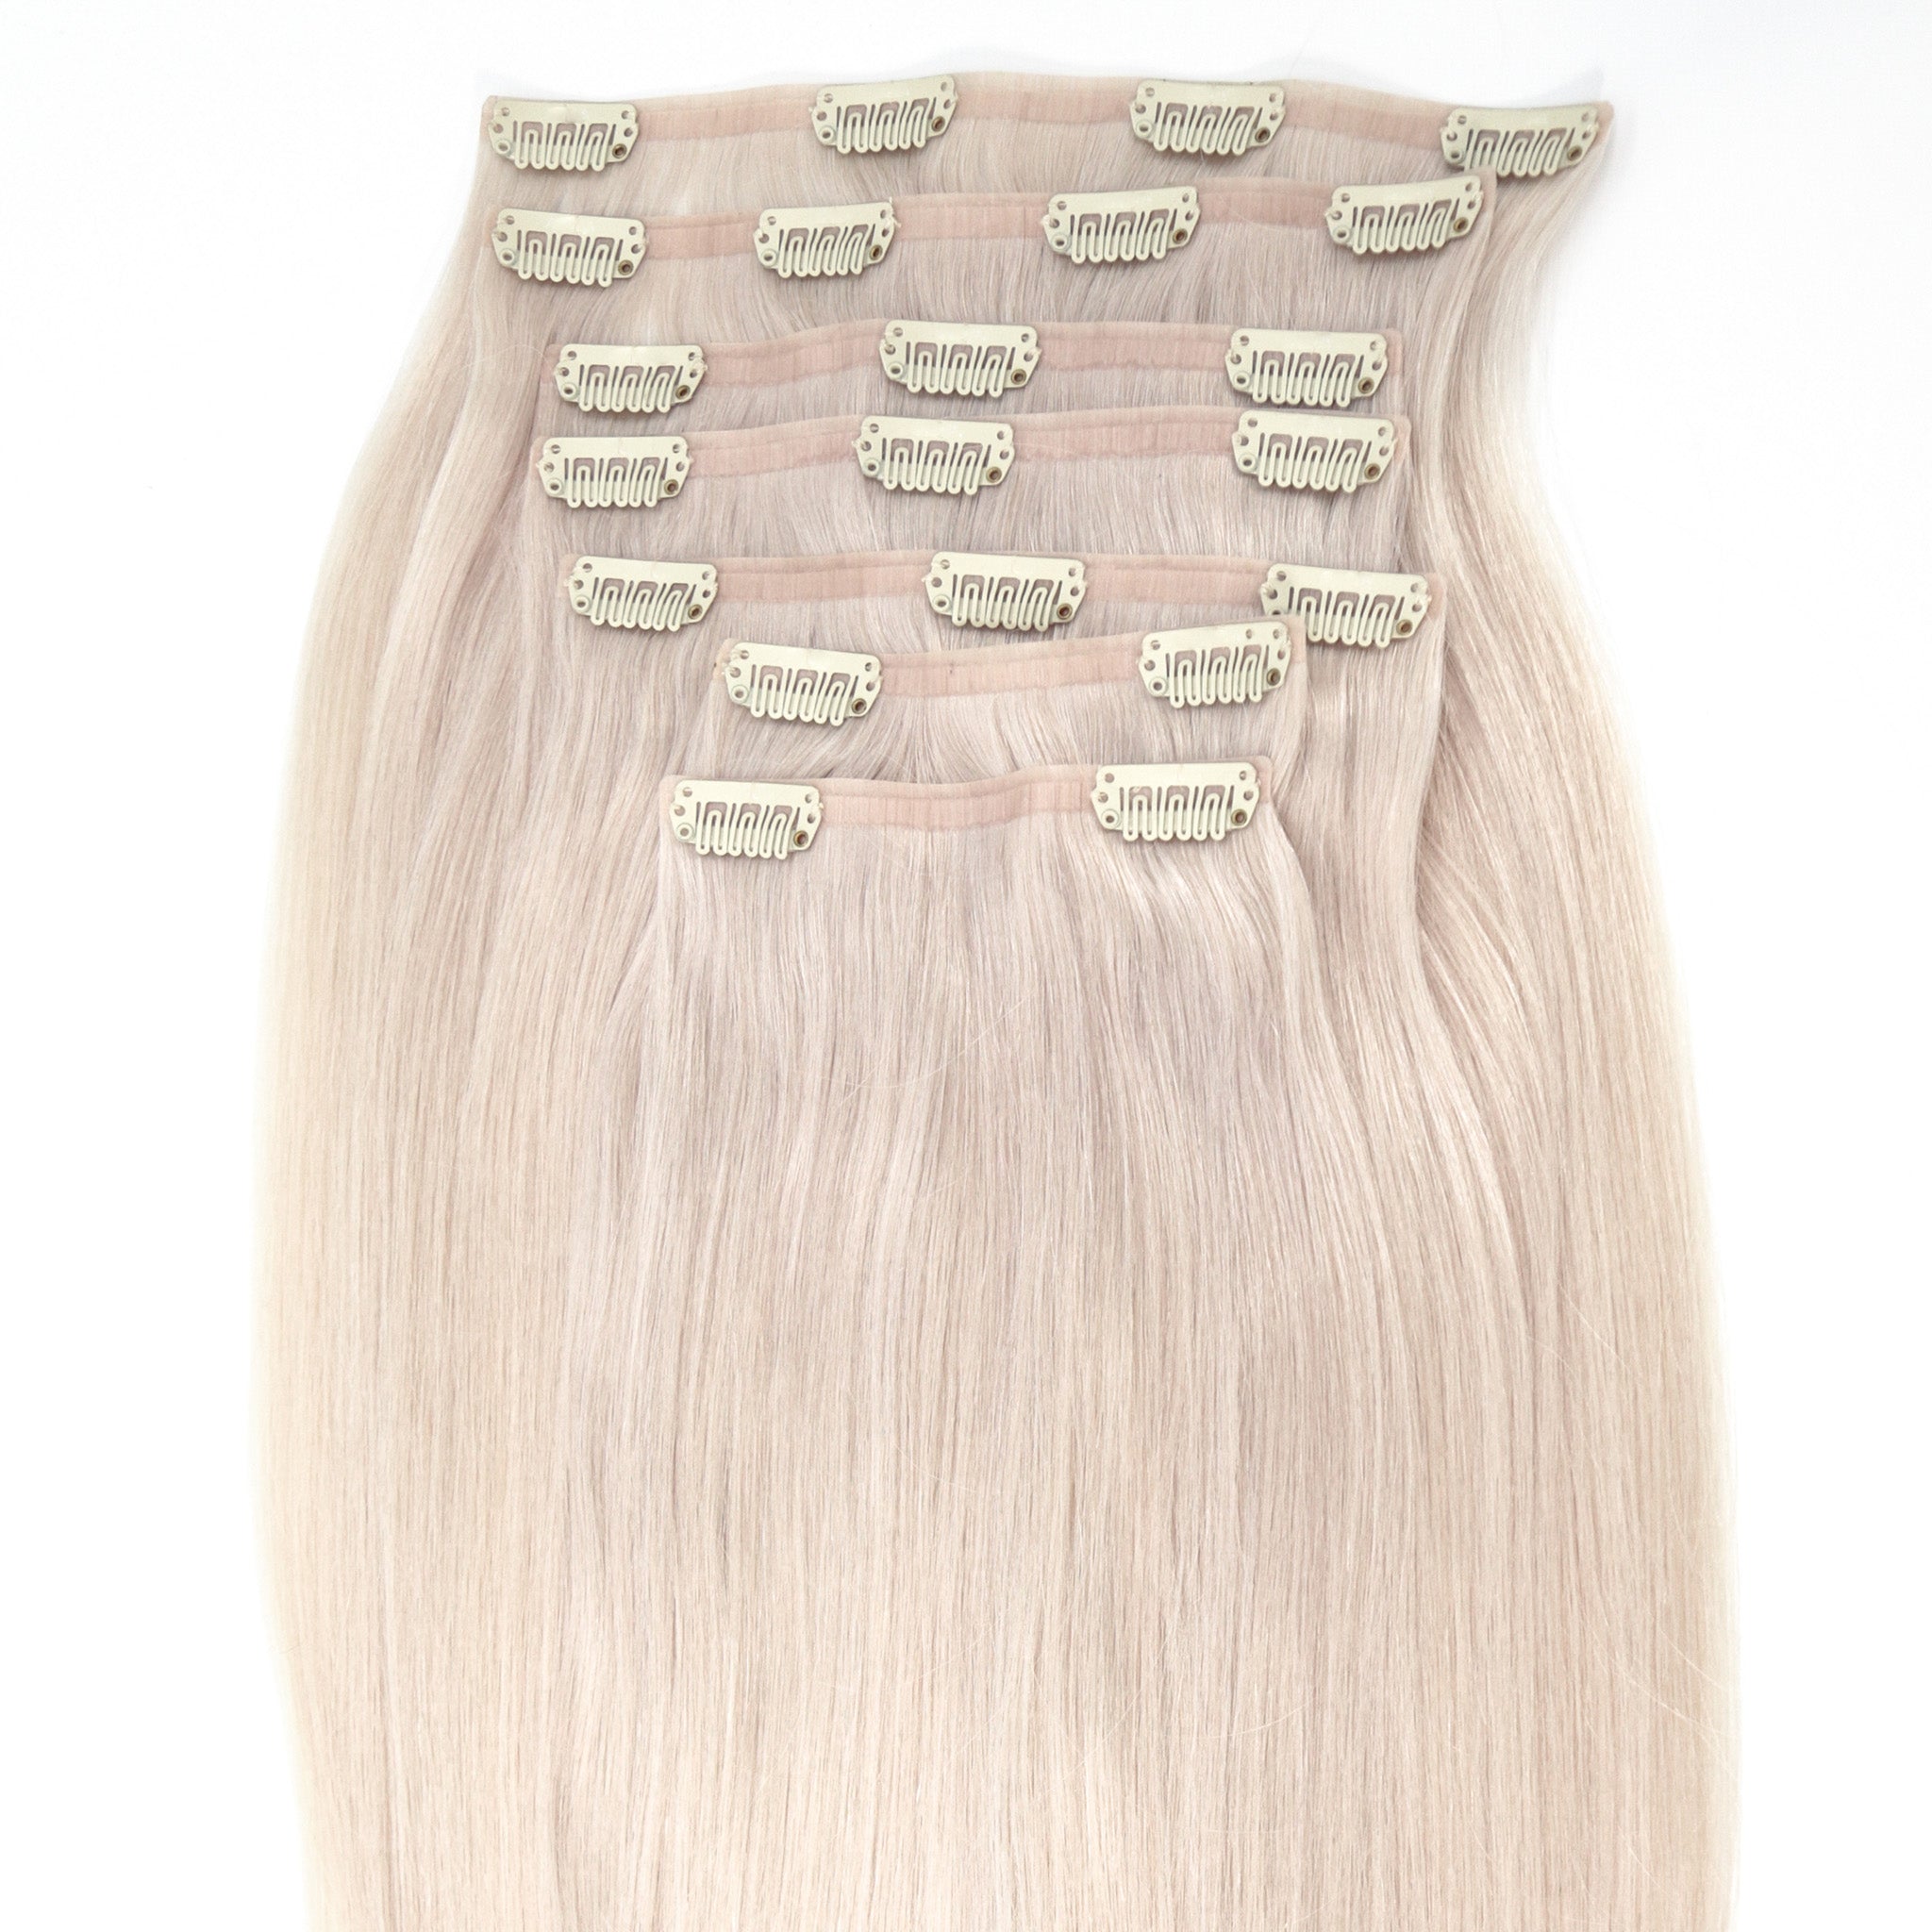 #62 Icy Blonde Ultra Narrow Clip In Hair Extensions